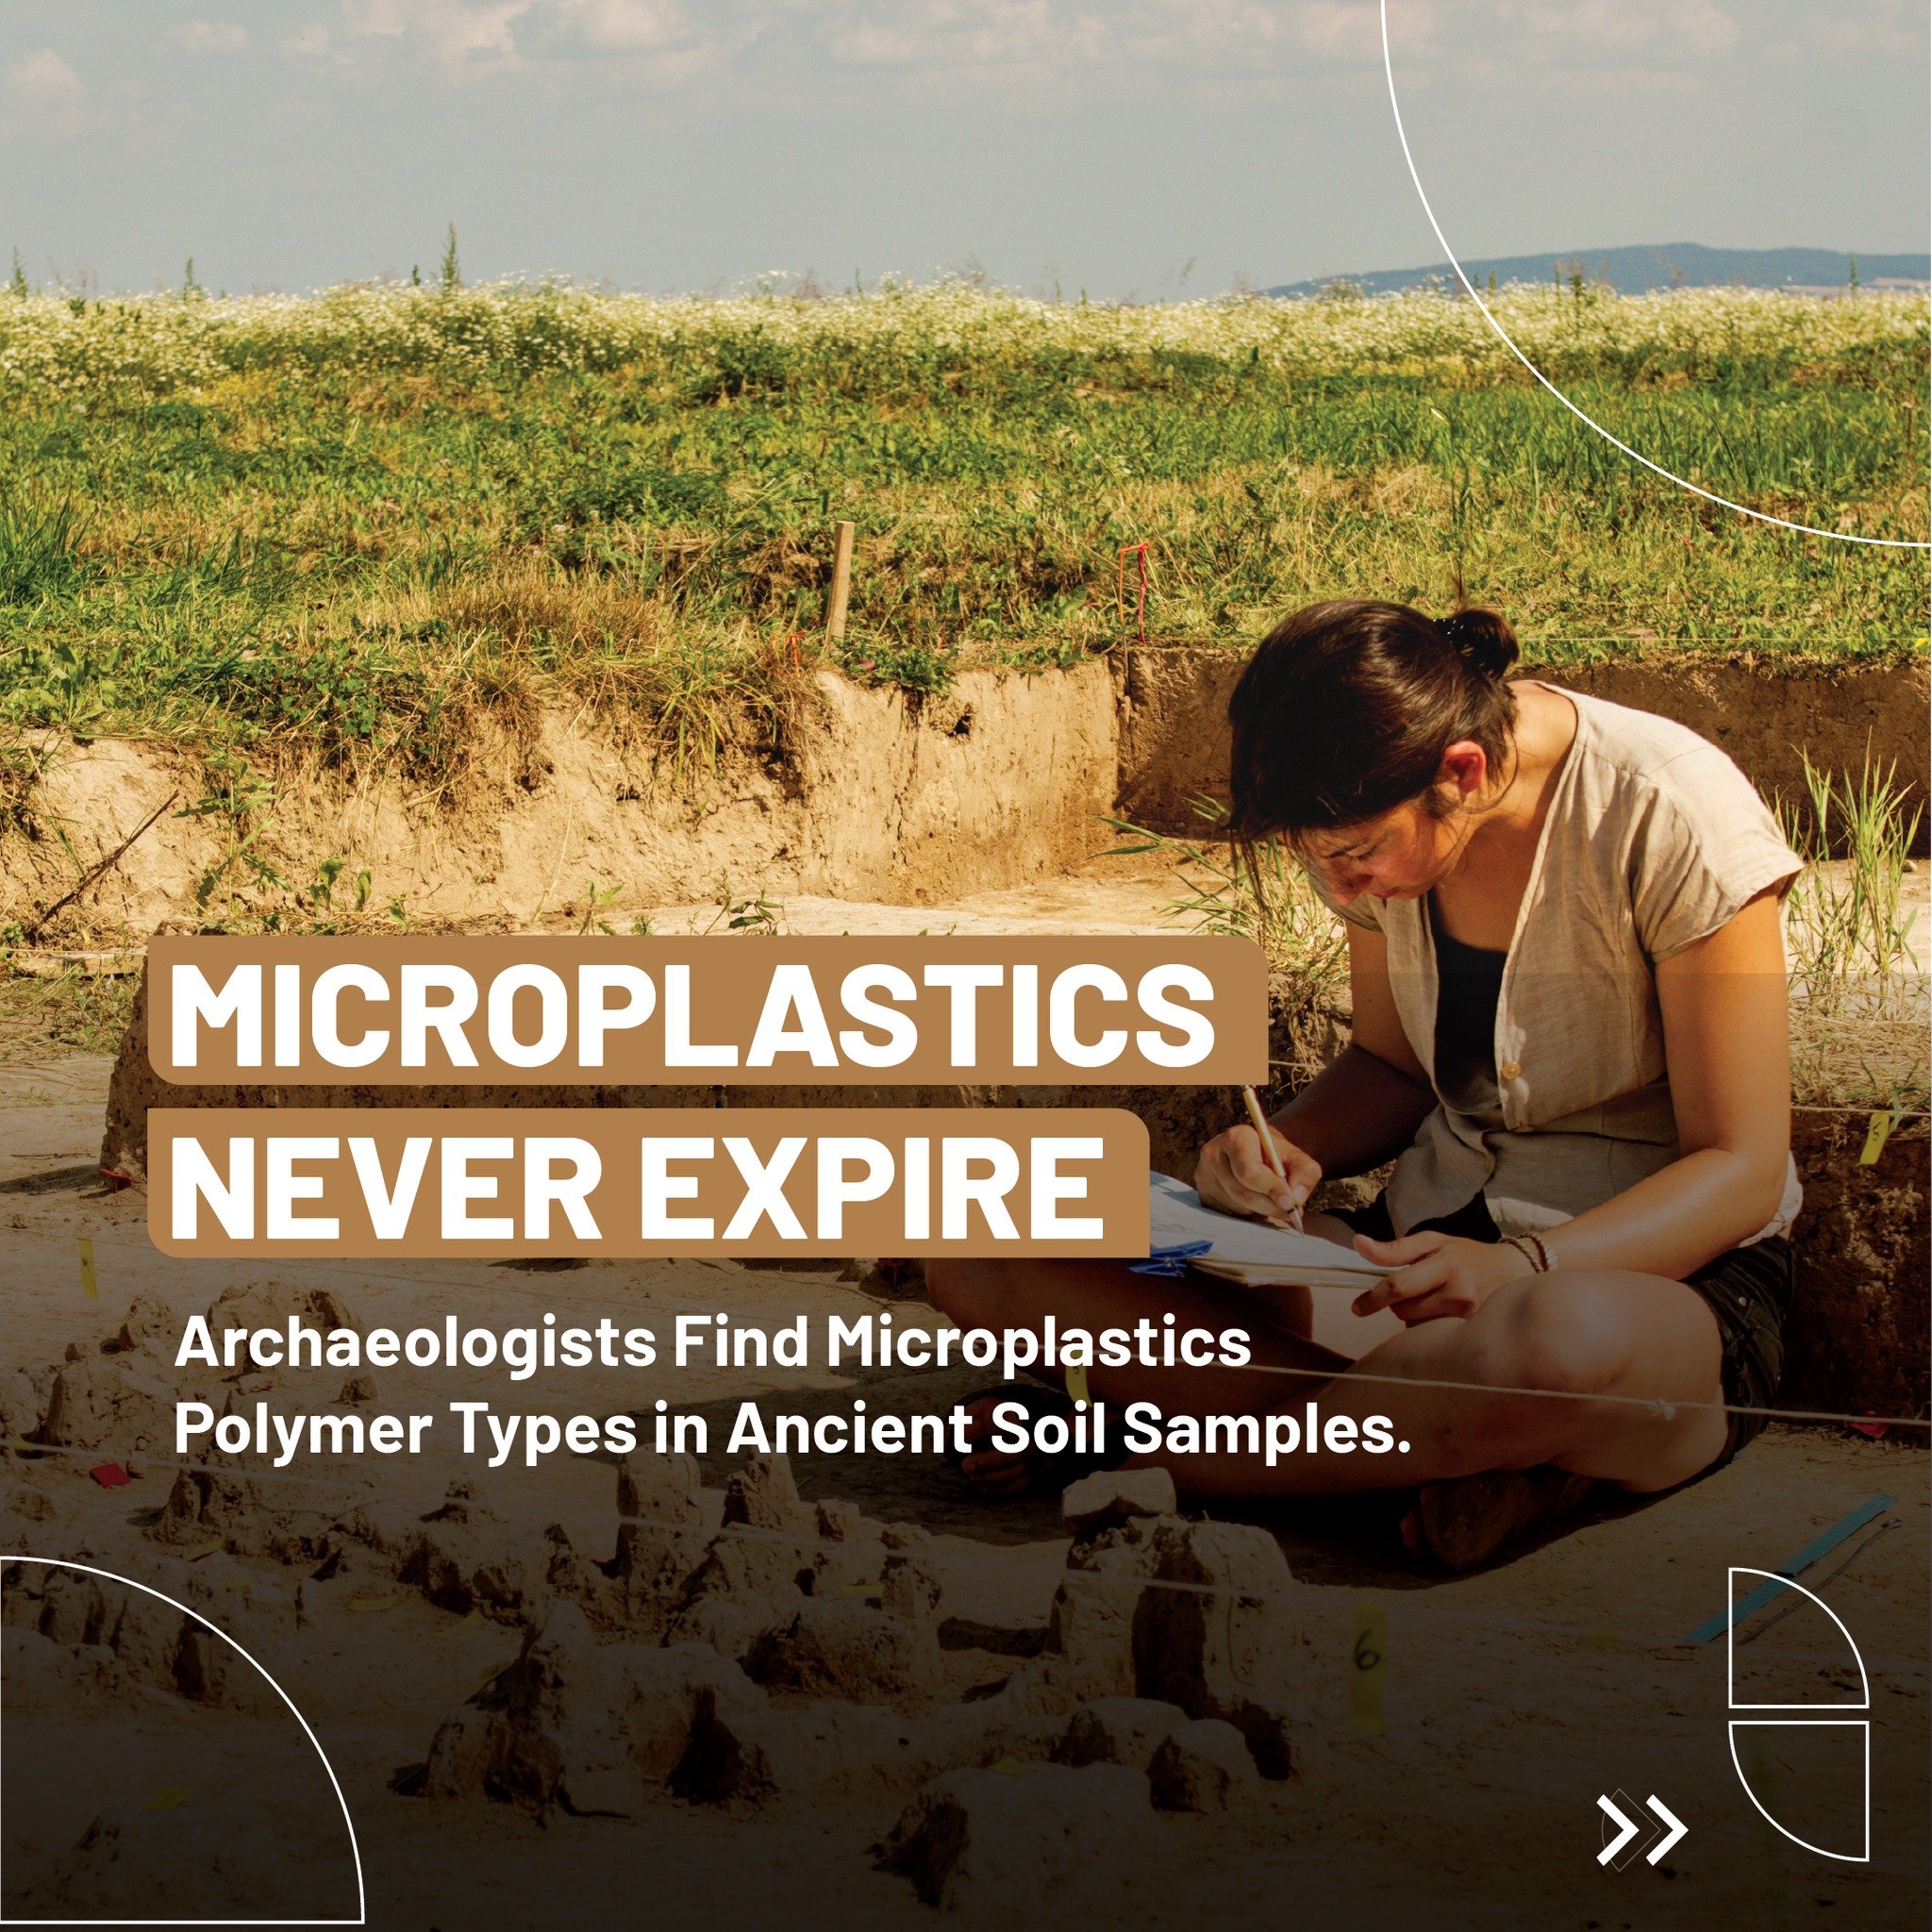 Archaeologists have uncovered evidence of microplastics in historical soil samples for the first time. Researchers found sixteen different types of microplastics polymers in historical soil samples that date back to the first or second century CE and